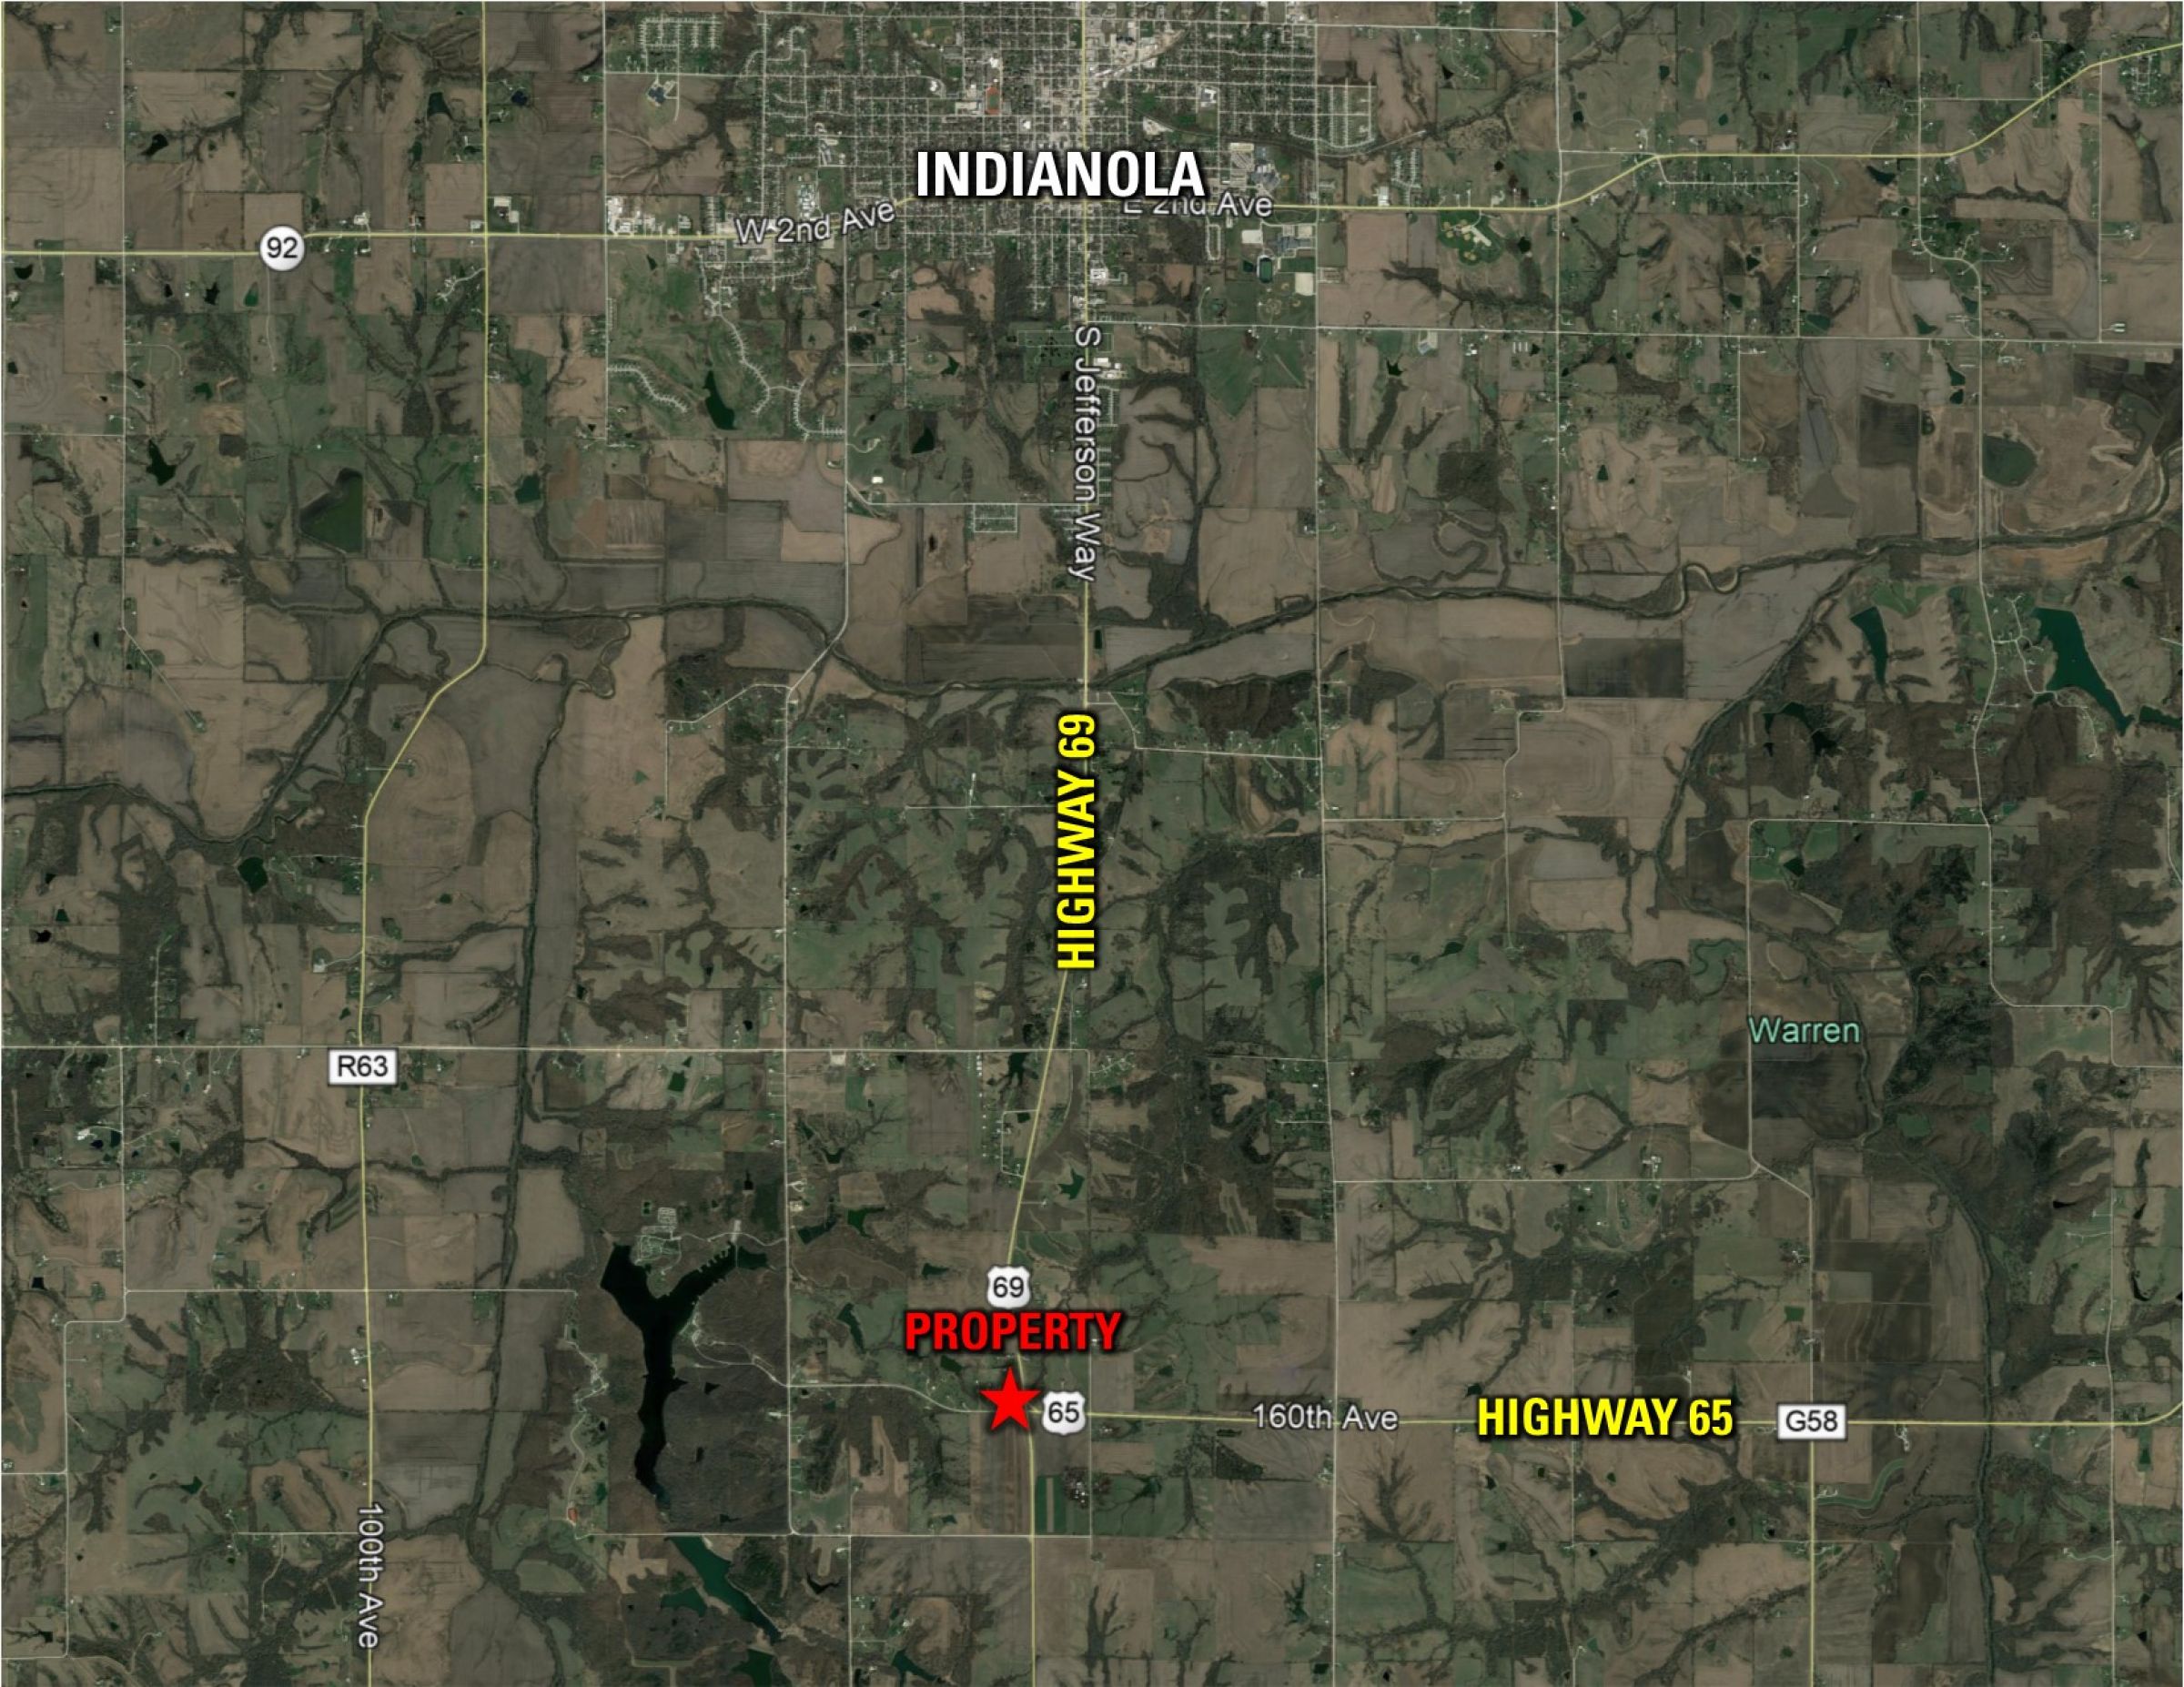 Peoples Company-Land in Warren County IA-13675 Hwy G58 Indianola